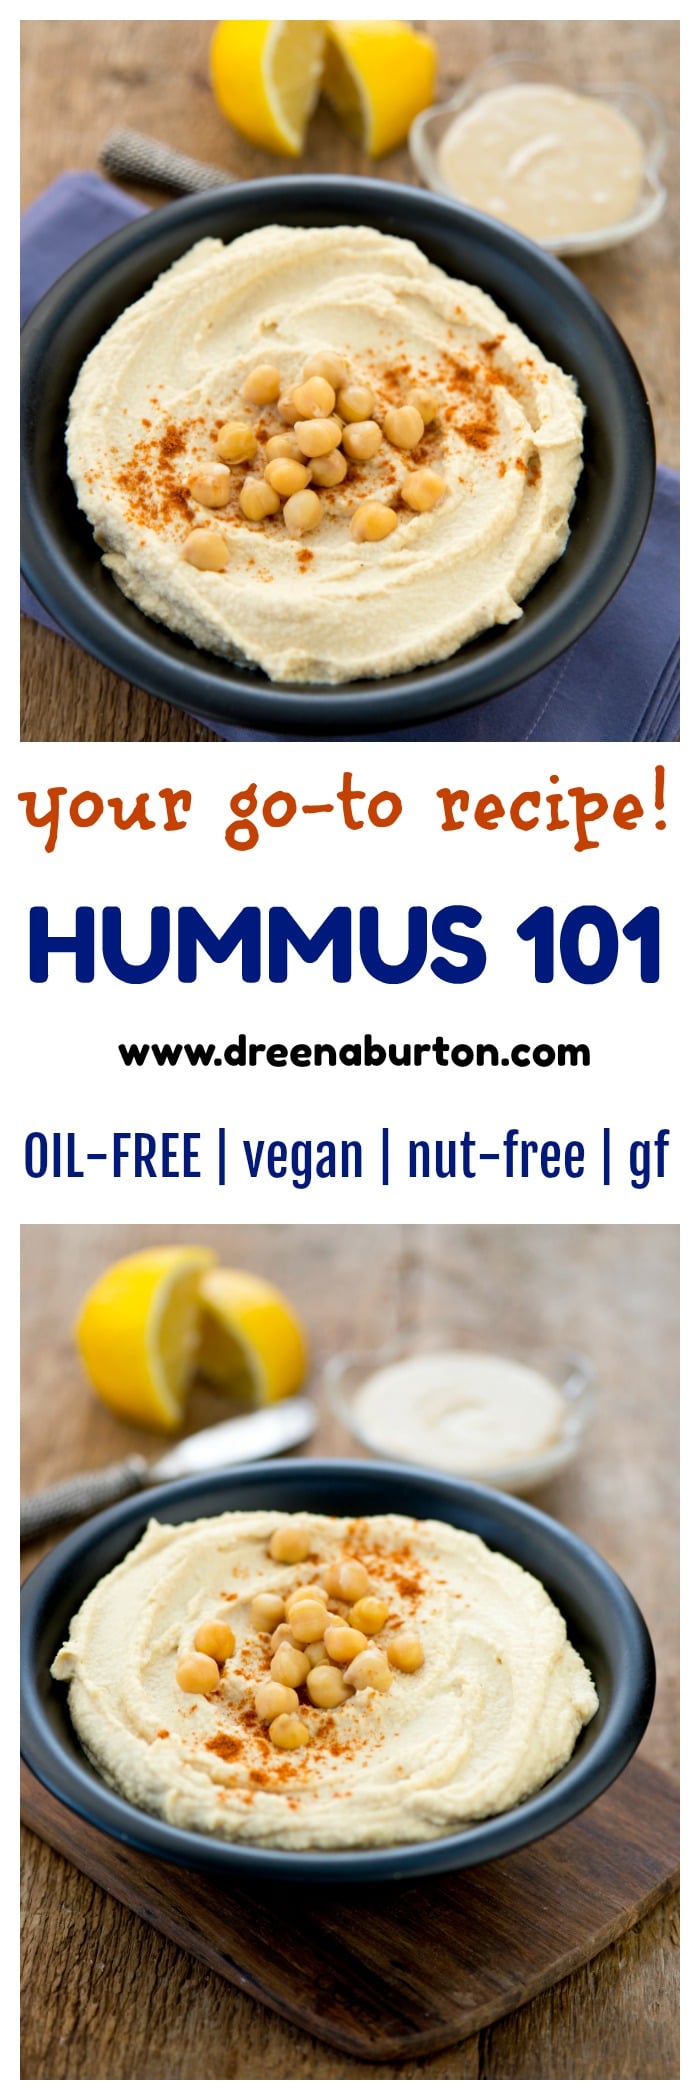 The only hummus recipe you need! HUMMUS 101 Perfect for plant-based lunches, snacks, and to use in recipes - a reader fave! 